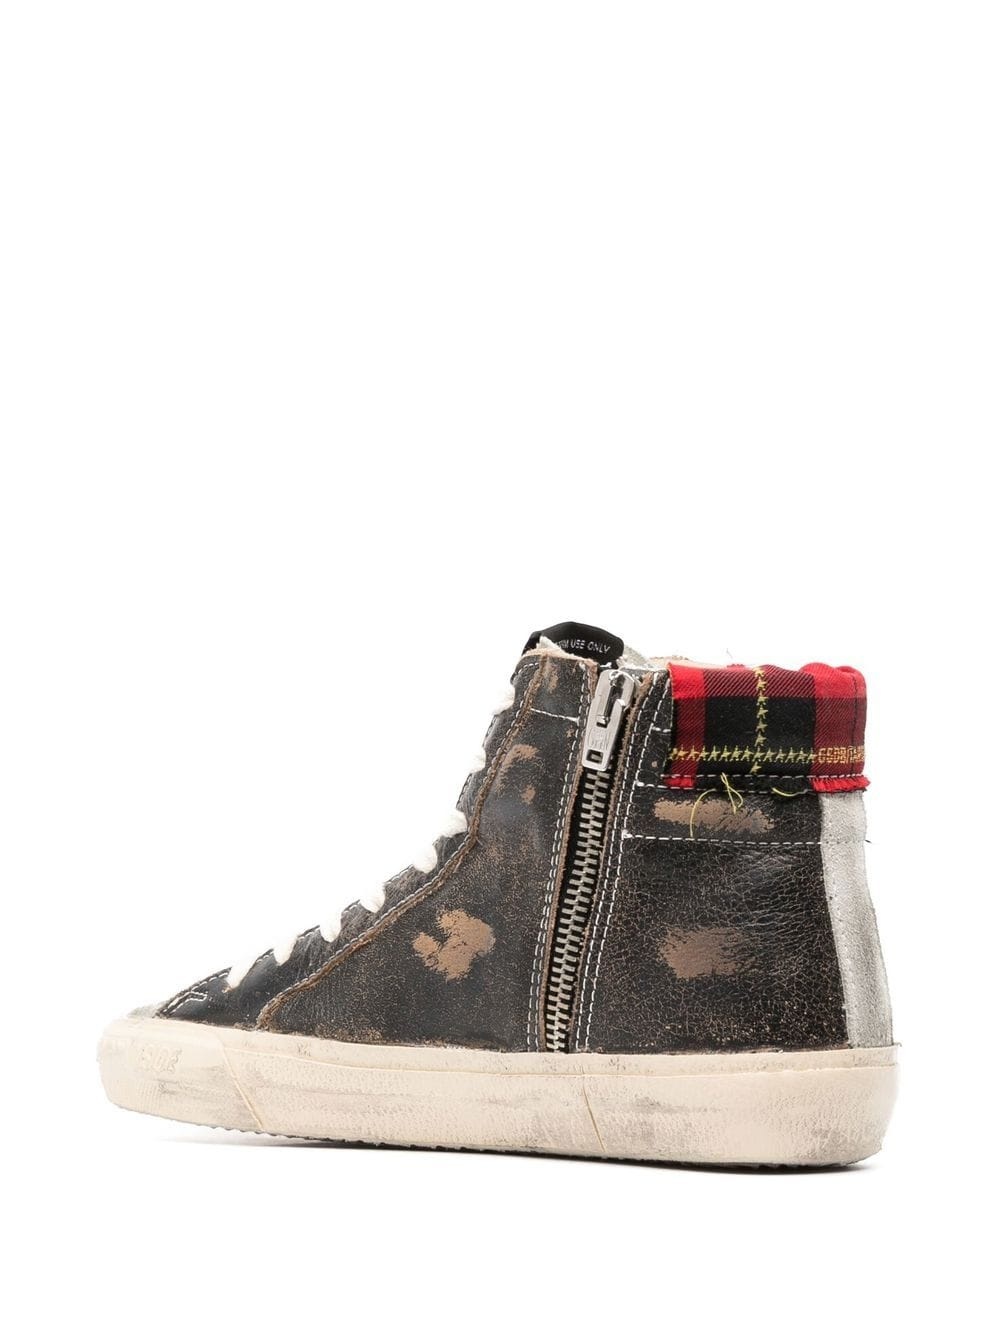 distressed-finish high-top sneakers - 3